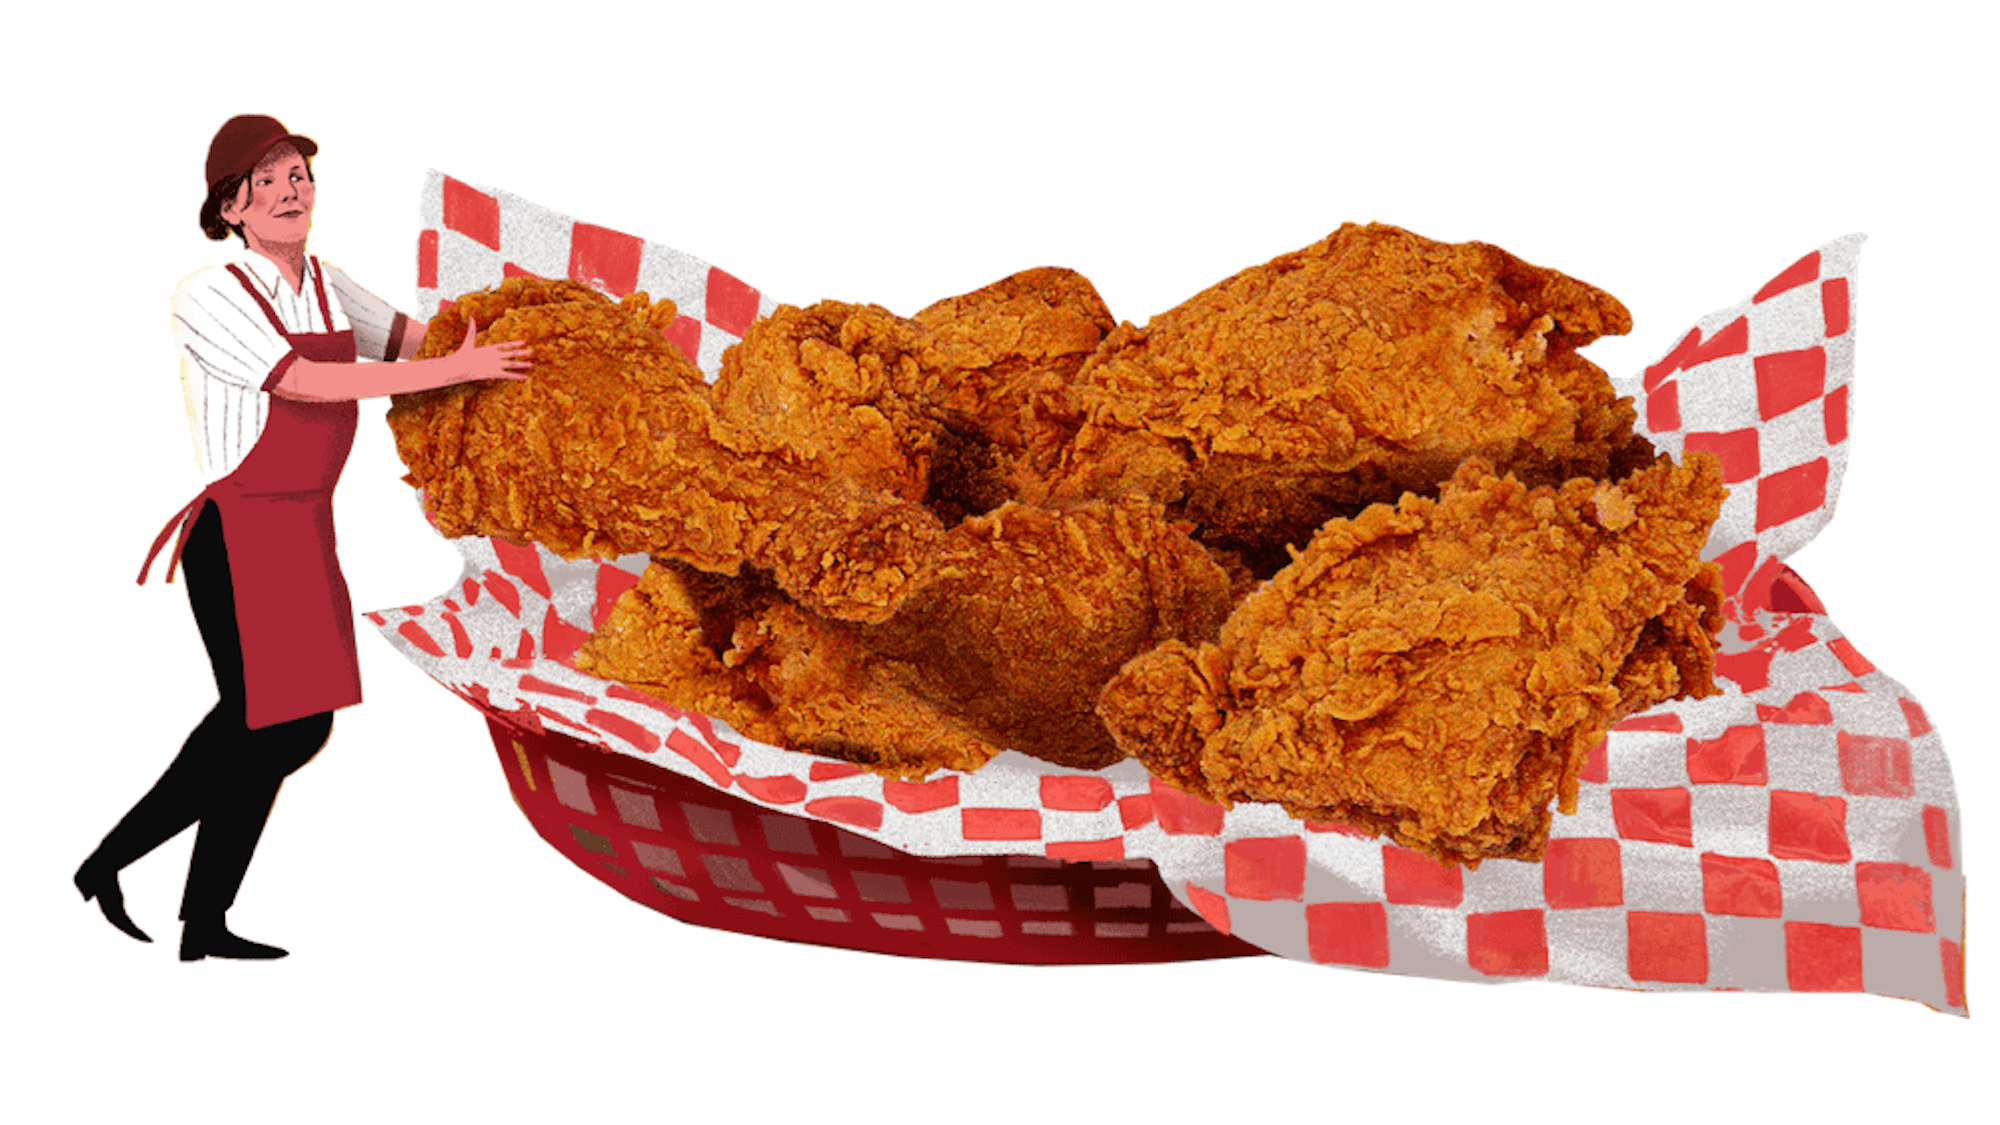 A delicious basket of fried chicken. The basket is red, with white and red checkered paper. There is a small figure with a red apron and a brown cap holding a piece of the chicken.